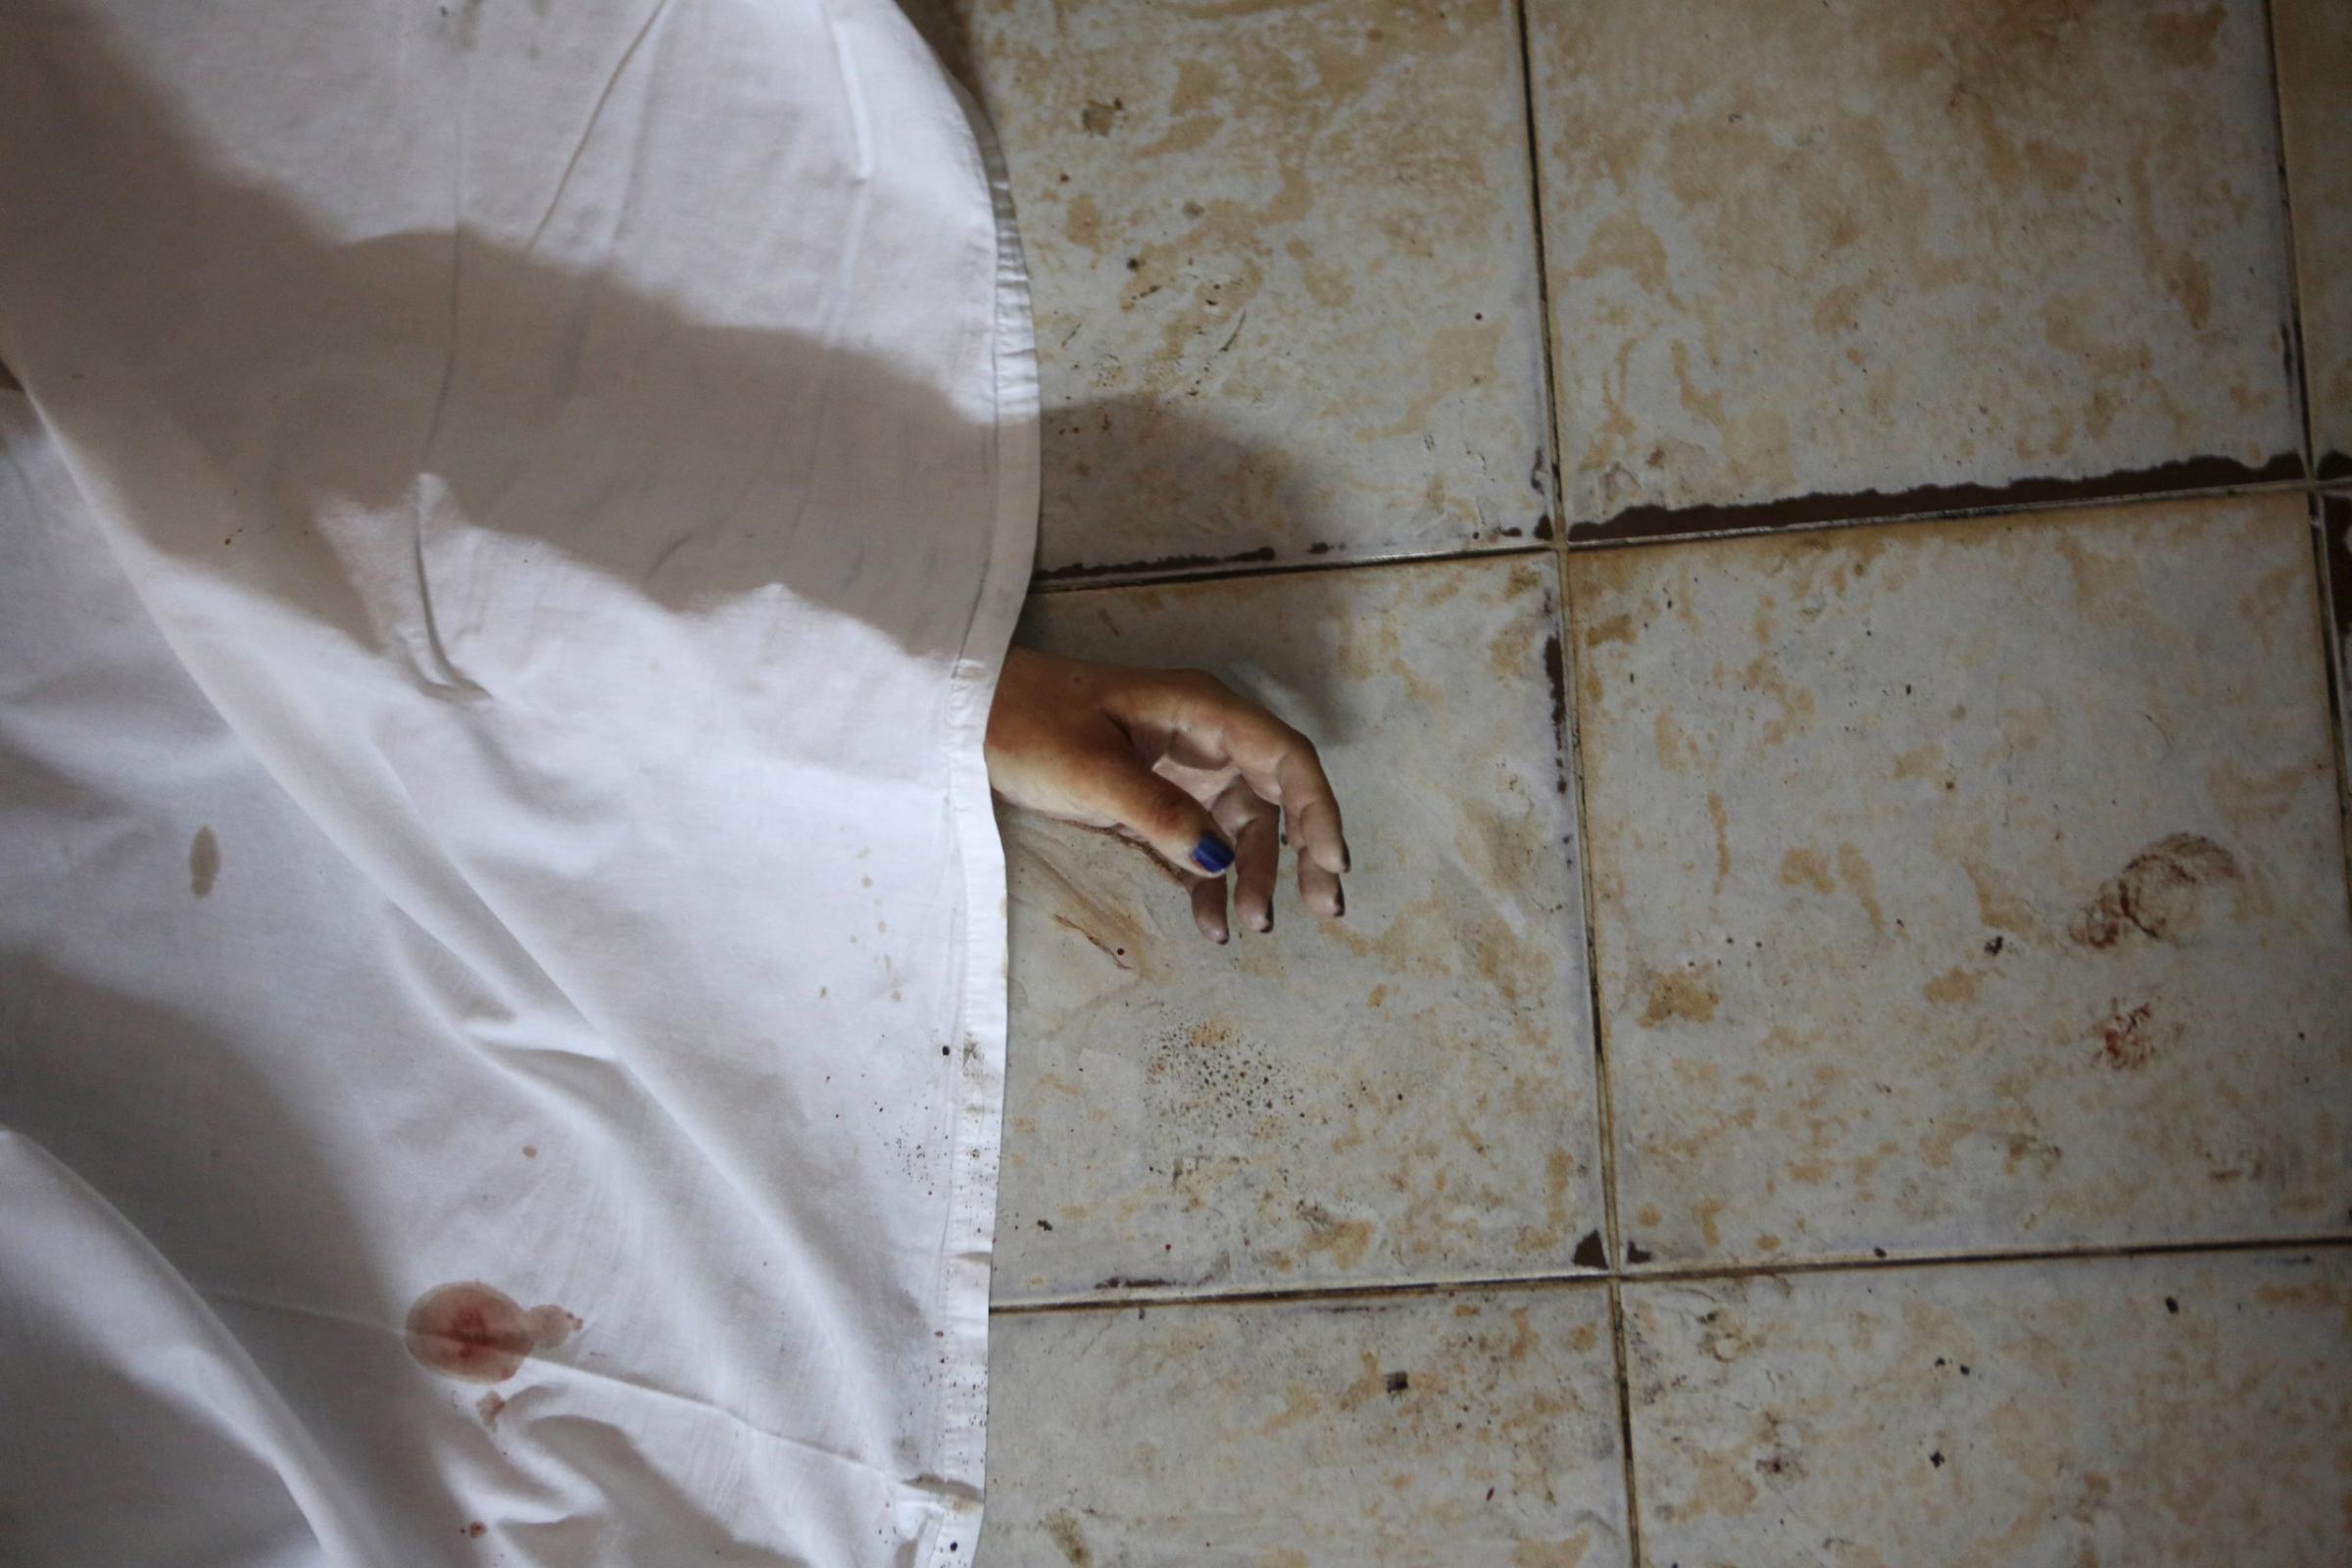 The hand of a person killed is seen after an attack in Grand Bassam